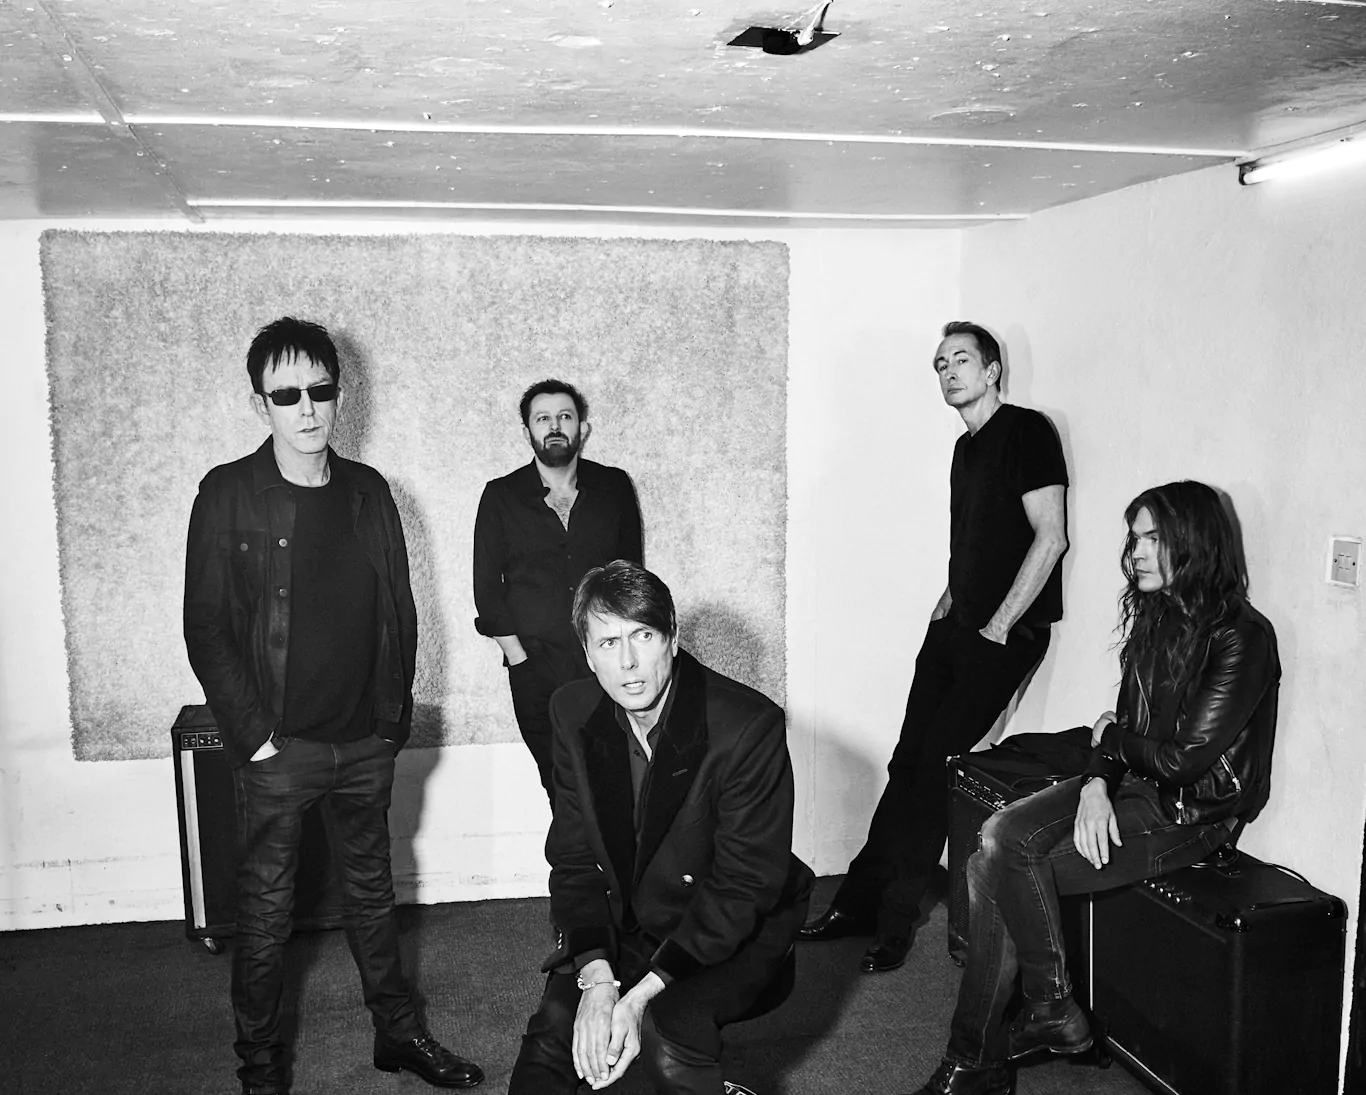 SUEDE announce new album ‘Autofiction’ due for release on 16th September – Hear first single ‘She Still Leads Me On’